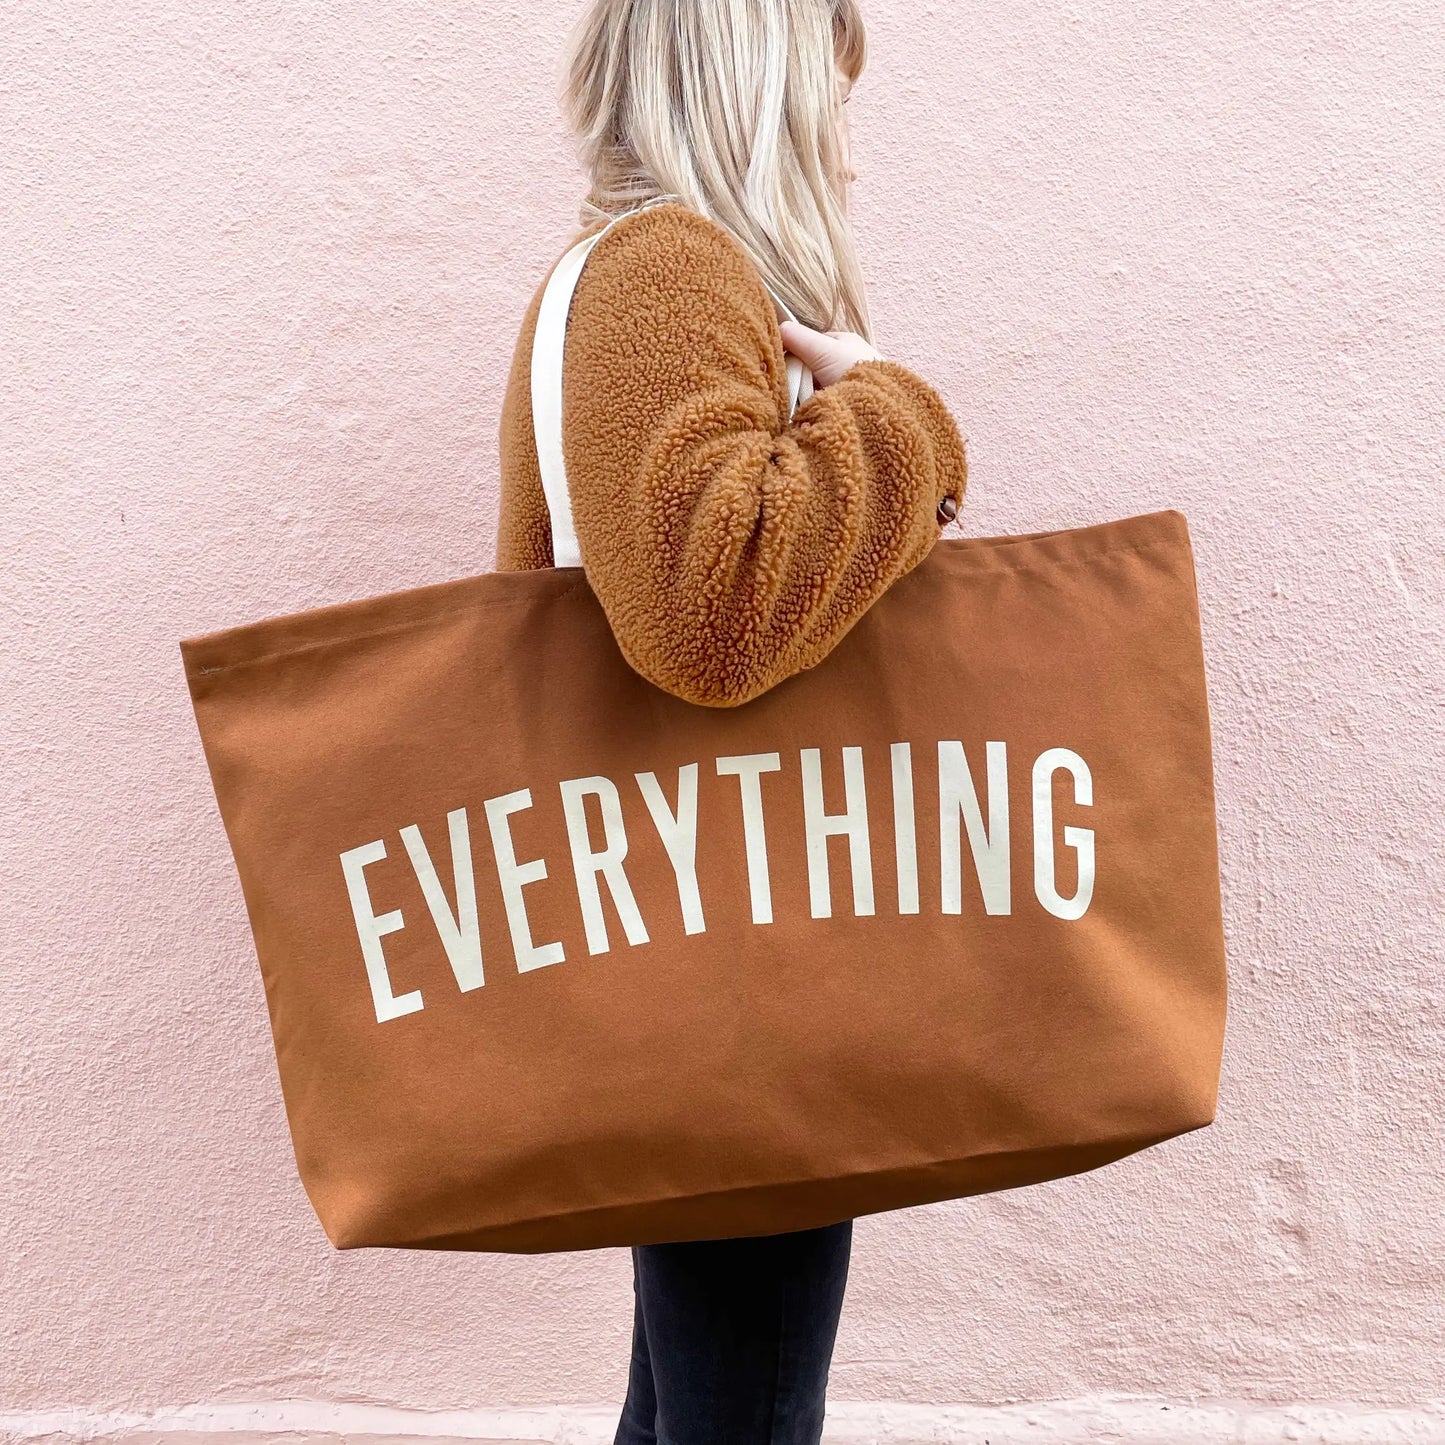 Everything Really Big Canvas Tote Bag - Tan